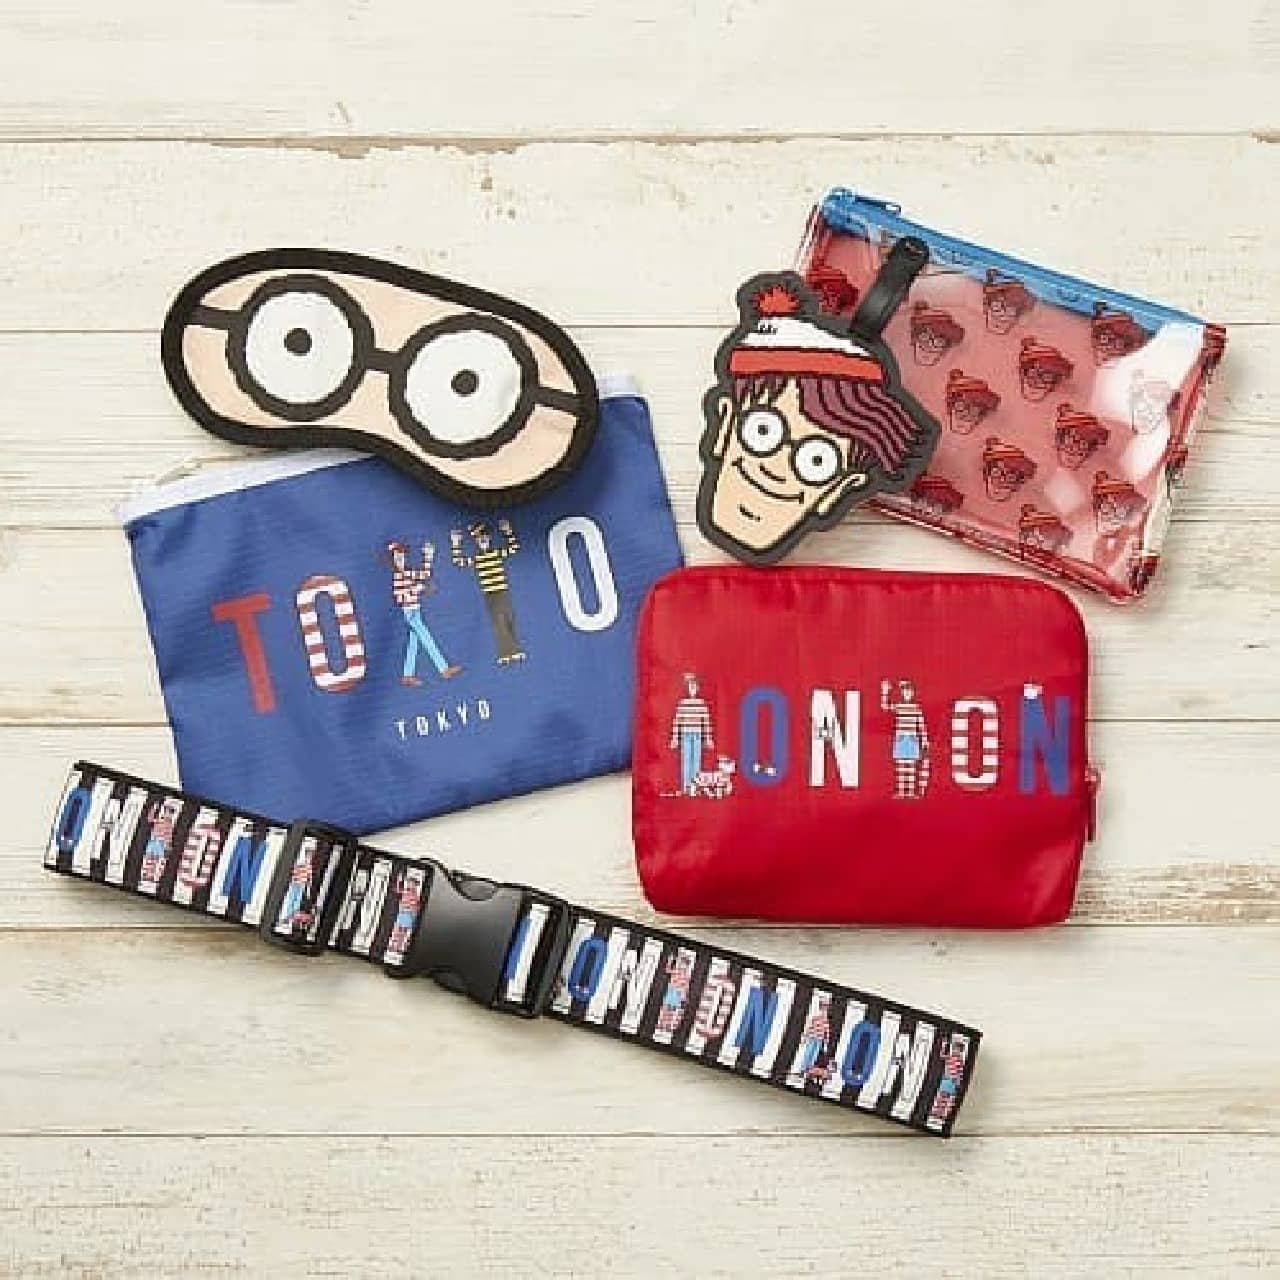 Travel goods for "Where's Wally!"